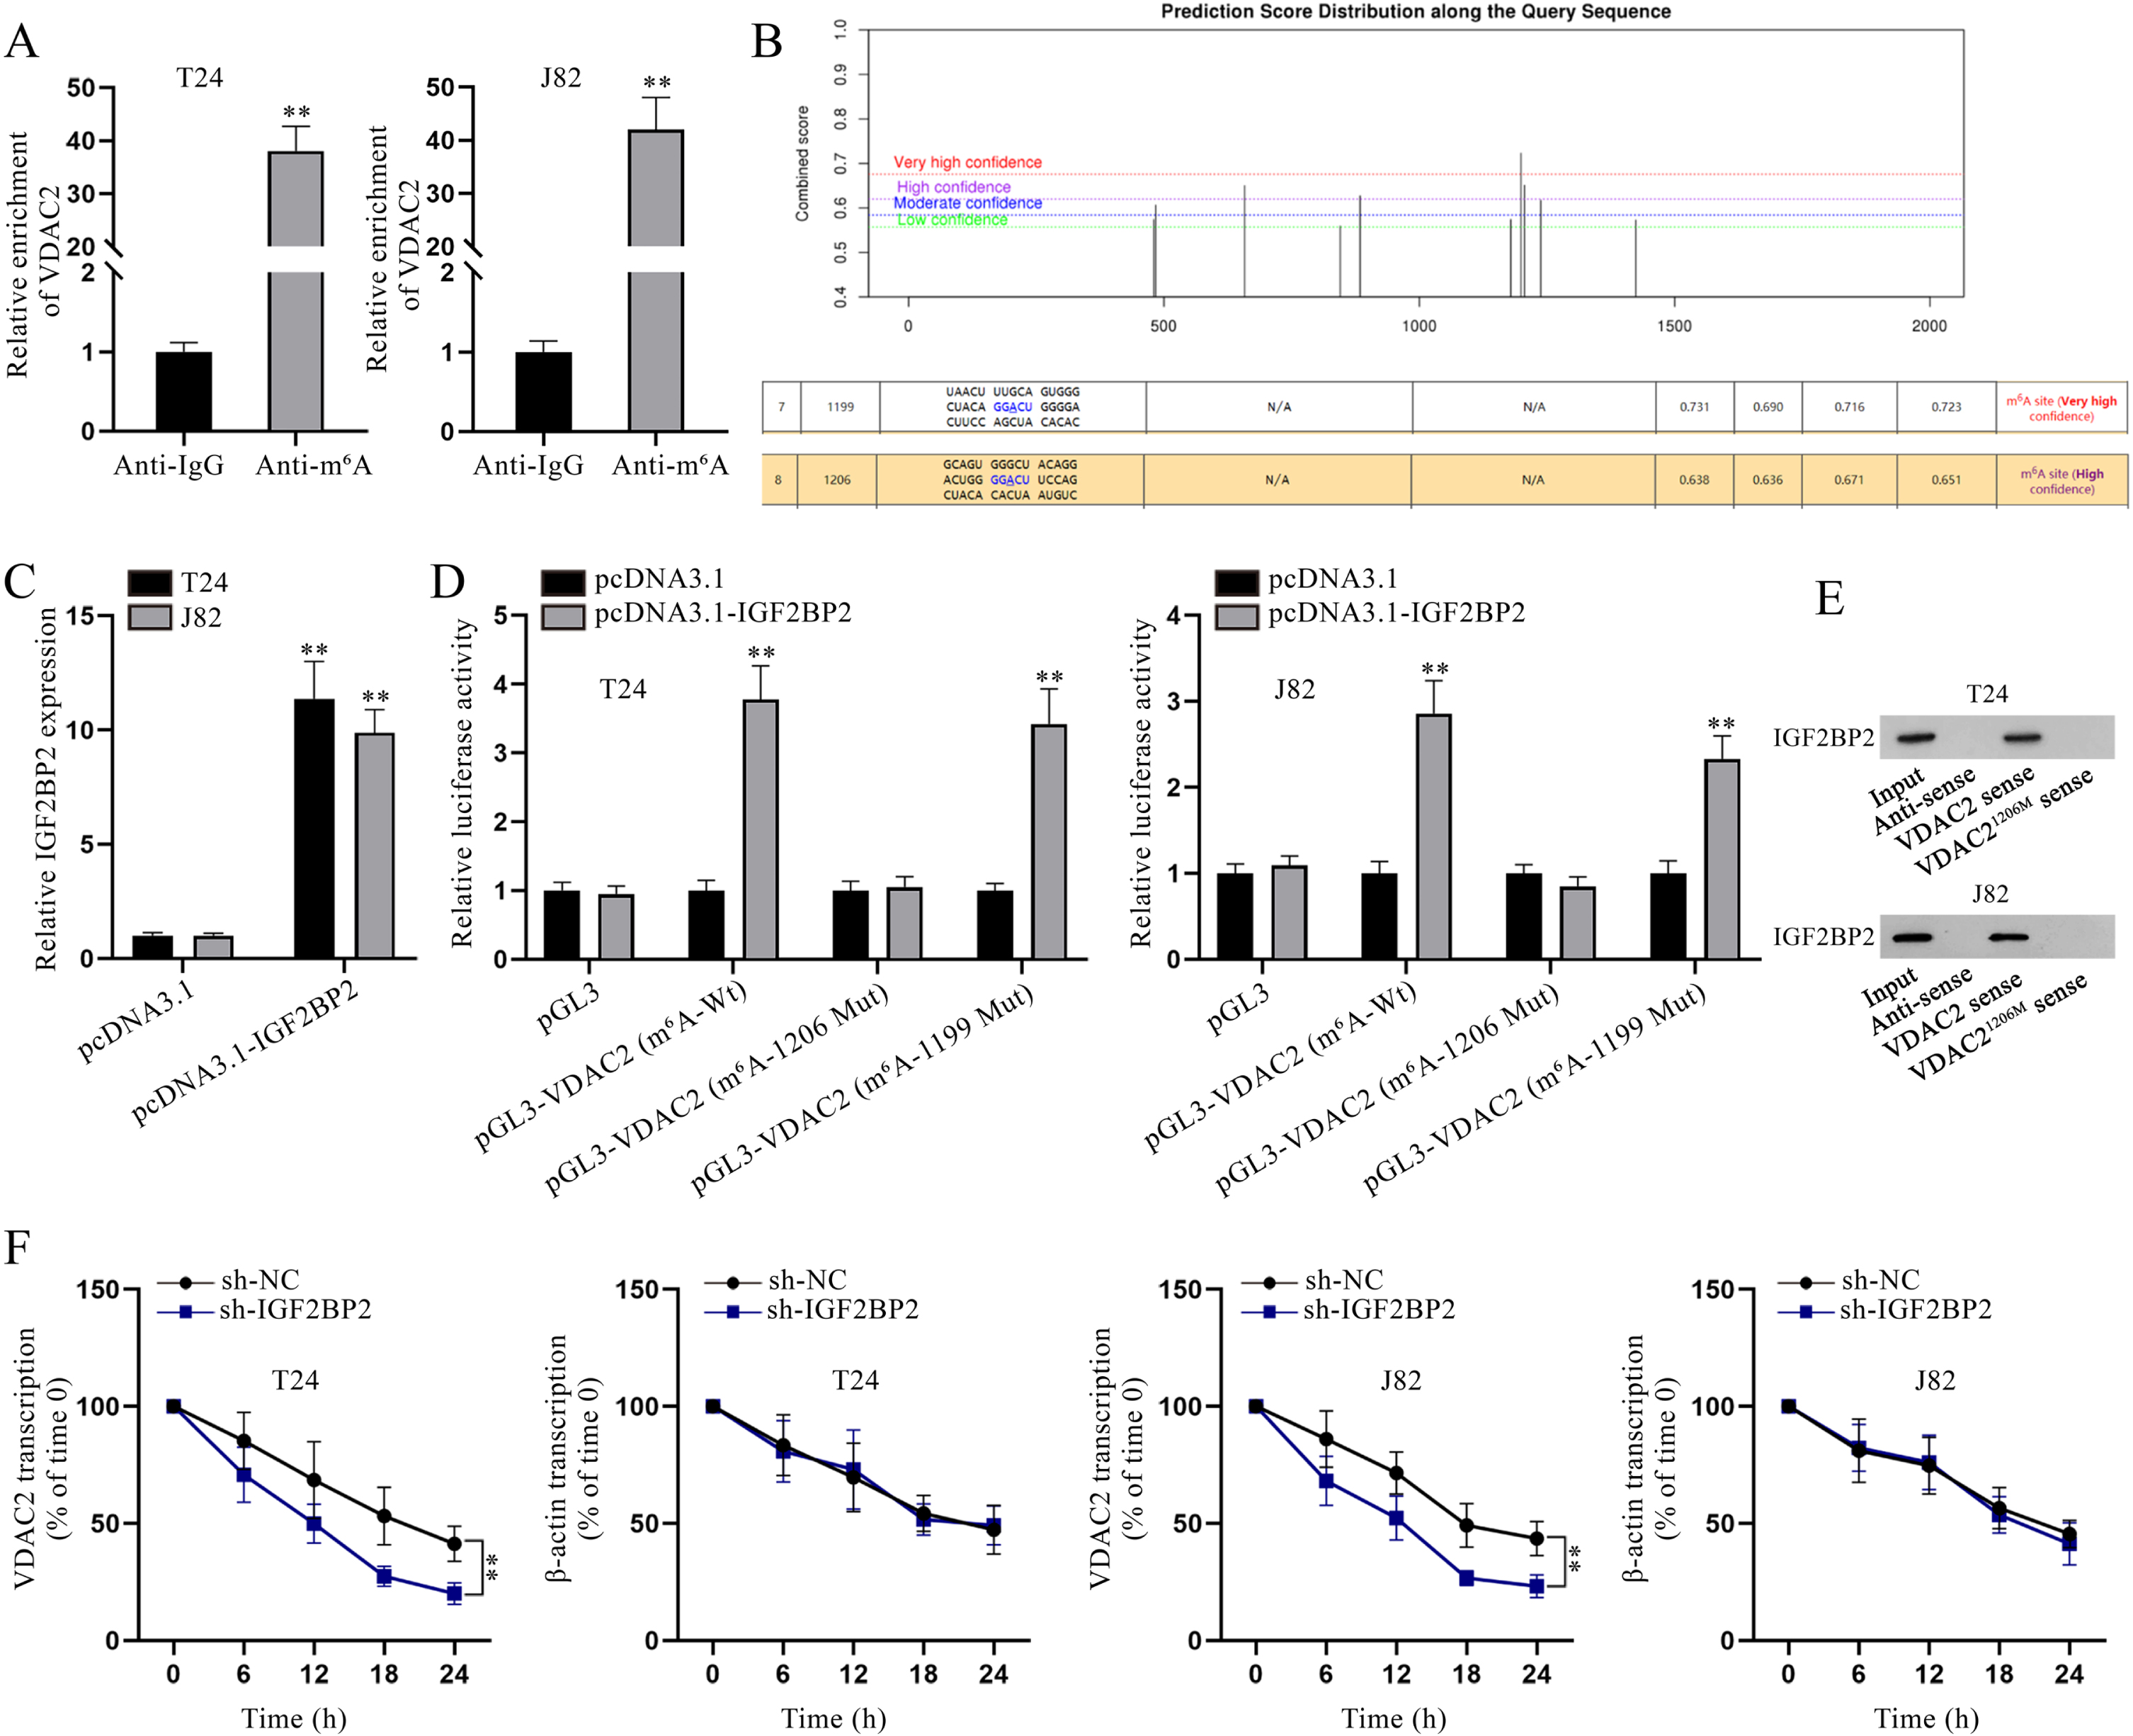 IGF2BP2 enhances VDAC2 mRNA stability in an m6A-dependent manner. (A) In RIP assay, VDAC2 enrichment in Anti-m6A was quantified via qPCR. (B) Bioinformatics analysis was done to predict the m6A methylation site on VDAC2. (C) IGF2BP2 overexpression efficiency was determined via qPCR analysis. (D) In luciferase reporter assay, cells were co-transfected with different luciferase reporter constructs and pcDNA3.1 or pcDNA3.1-IGF2BP2 to determine the methylation site on VDAC2. (E) After RNA pulldown assay, IGF2BP2 level pulled down by the indicated probes was measured via WB. (F) VDAC2 mRNA stability was evaluated at different time points in sh-NC- or sh-IGF2BP2-transfected cells after the addition of 50mM β-amanitin. **P < 0.01.